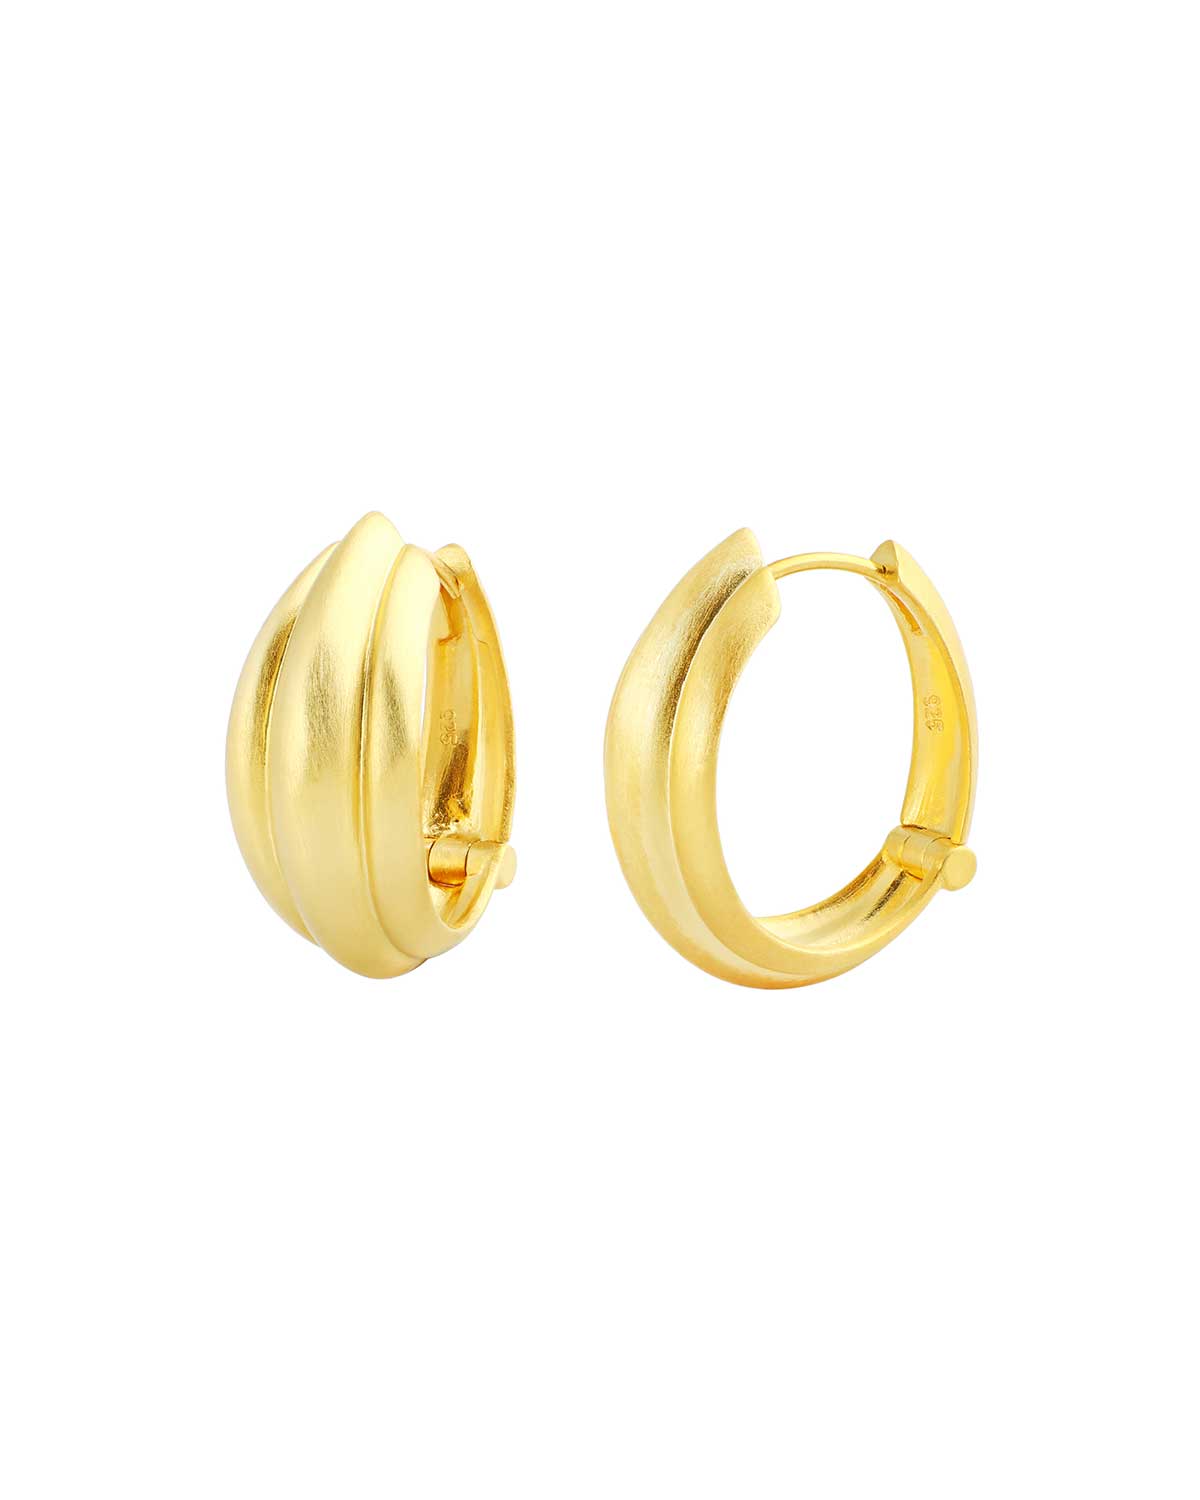  Bold Gold Hoops Earring - ‘The Pasiphae’